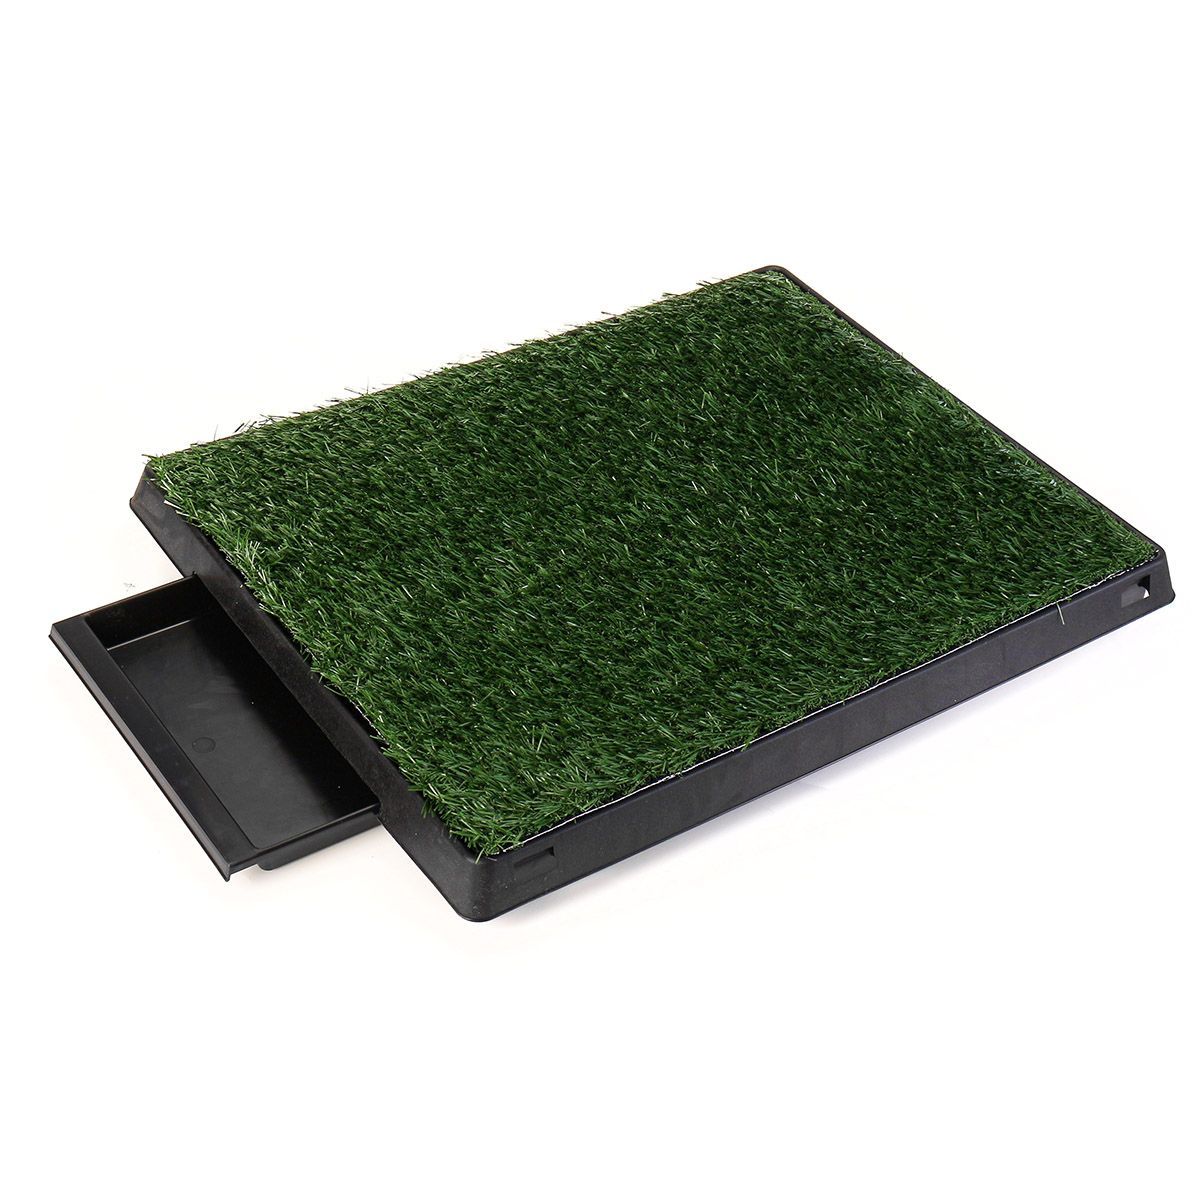 Indoor-Dog-Pet-Potty-Training-Portable-Toilet-Pads-Tray-With-1-PC-Replace-Grass-Mat-1655628